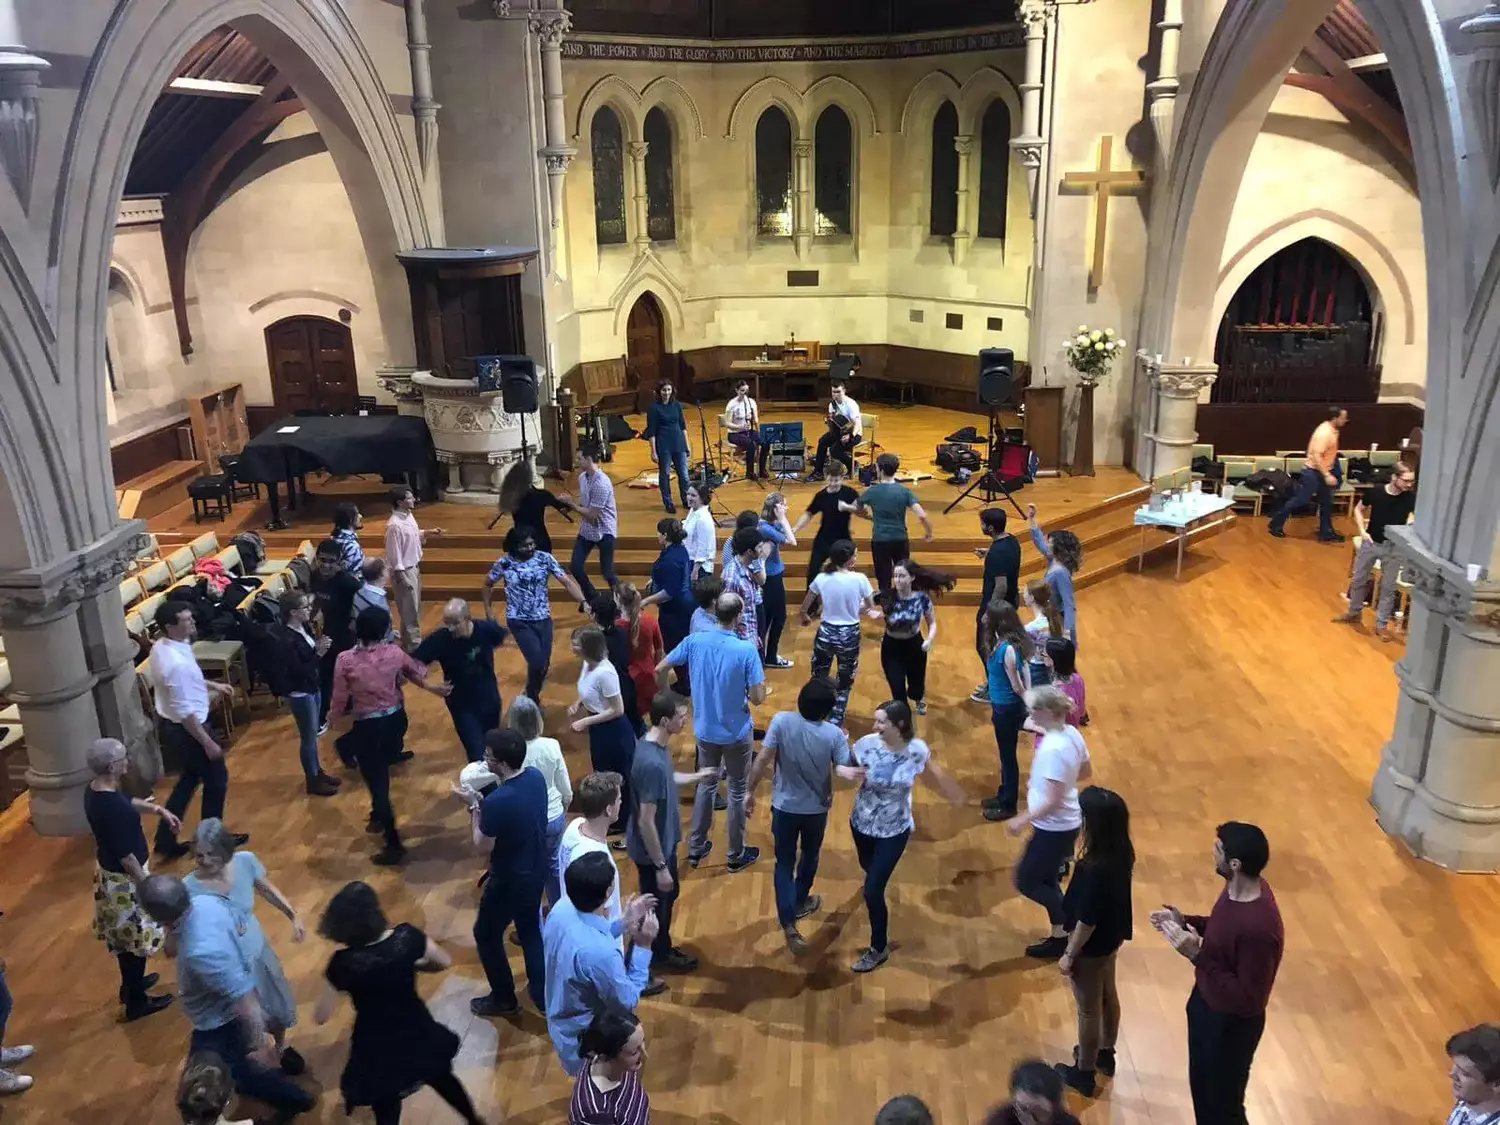 People dancing at a ceilidh.